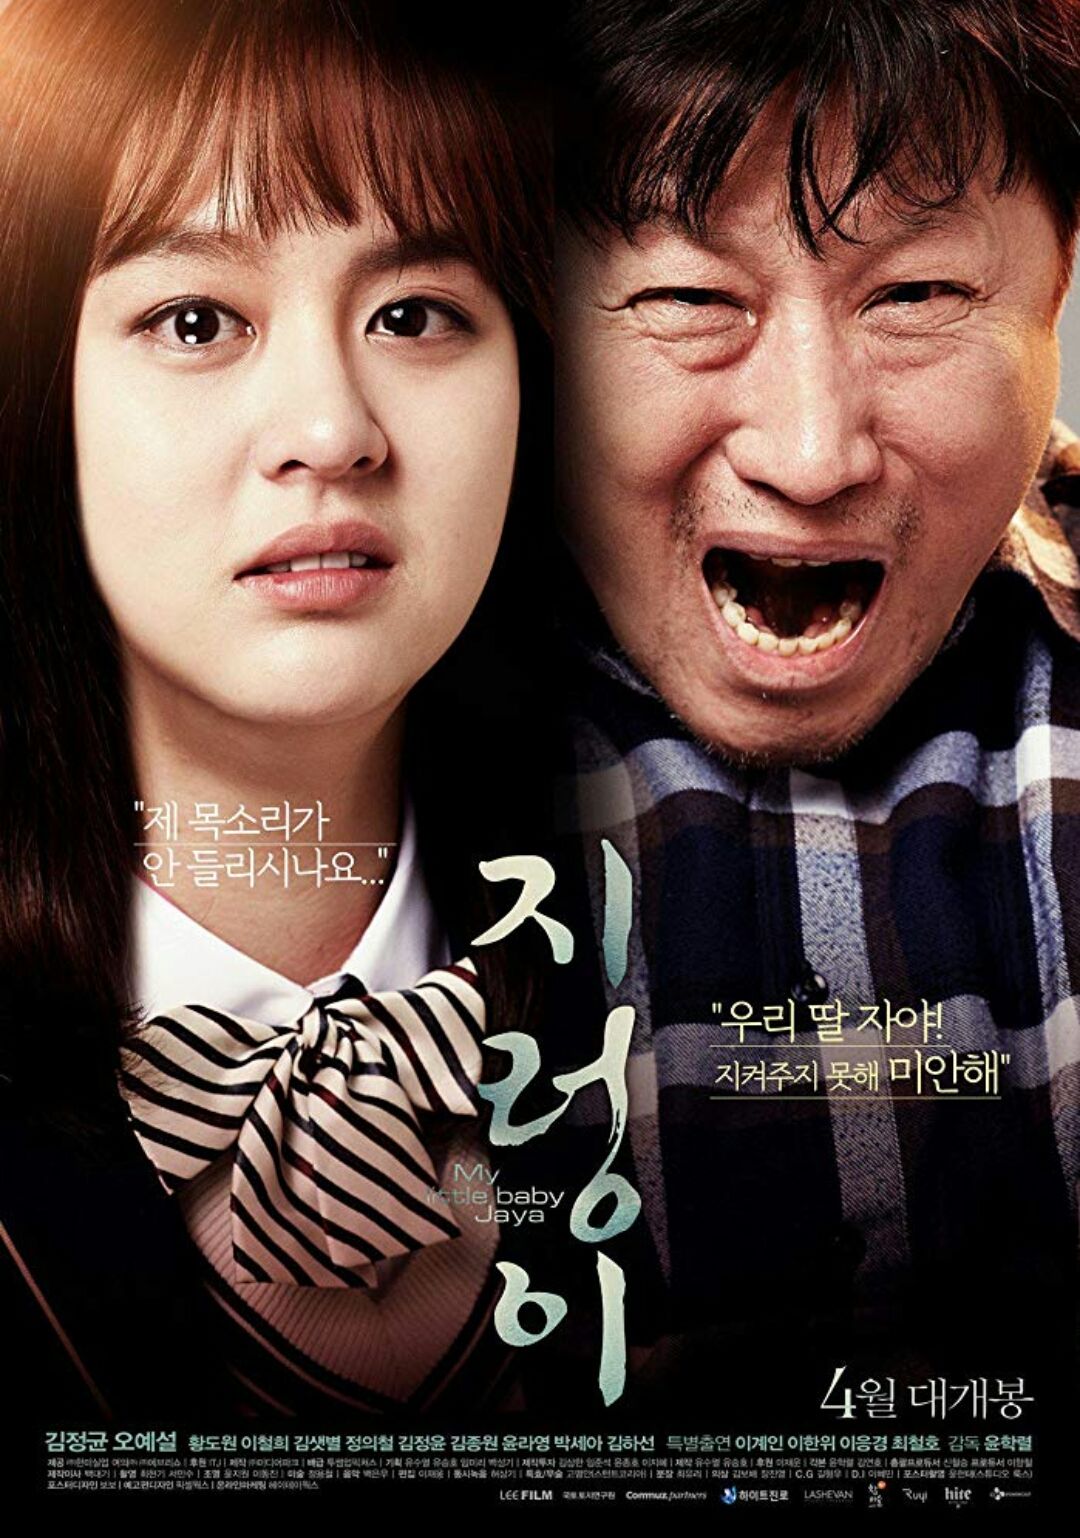 My Sister's Friend 2 (누나 친구 2) - Movie - Picture Gallery @ HanCinema :: The Korean Movie and ...